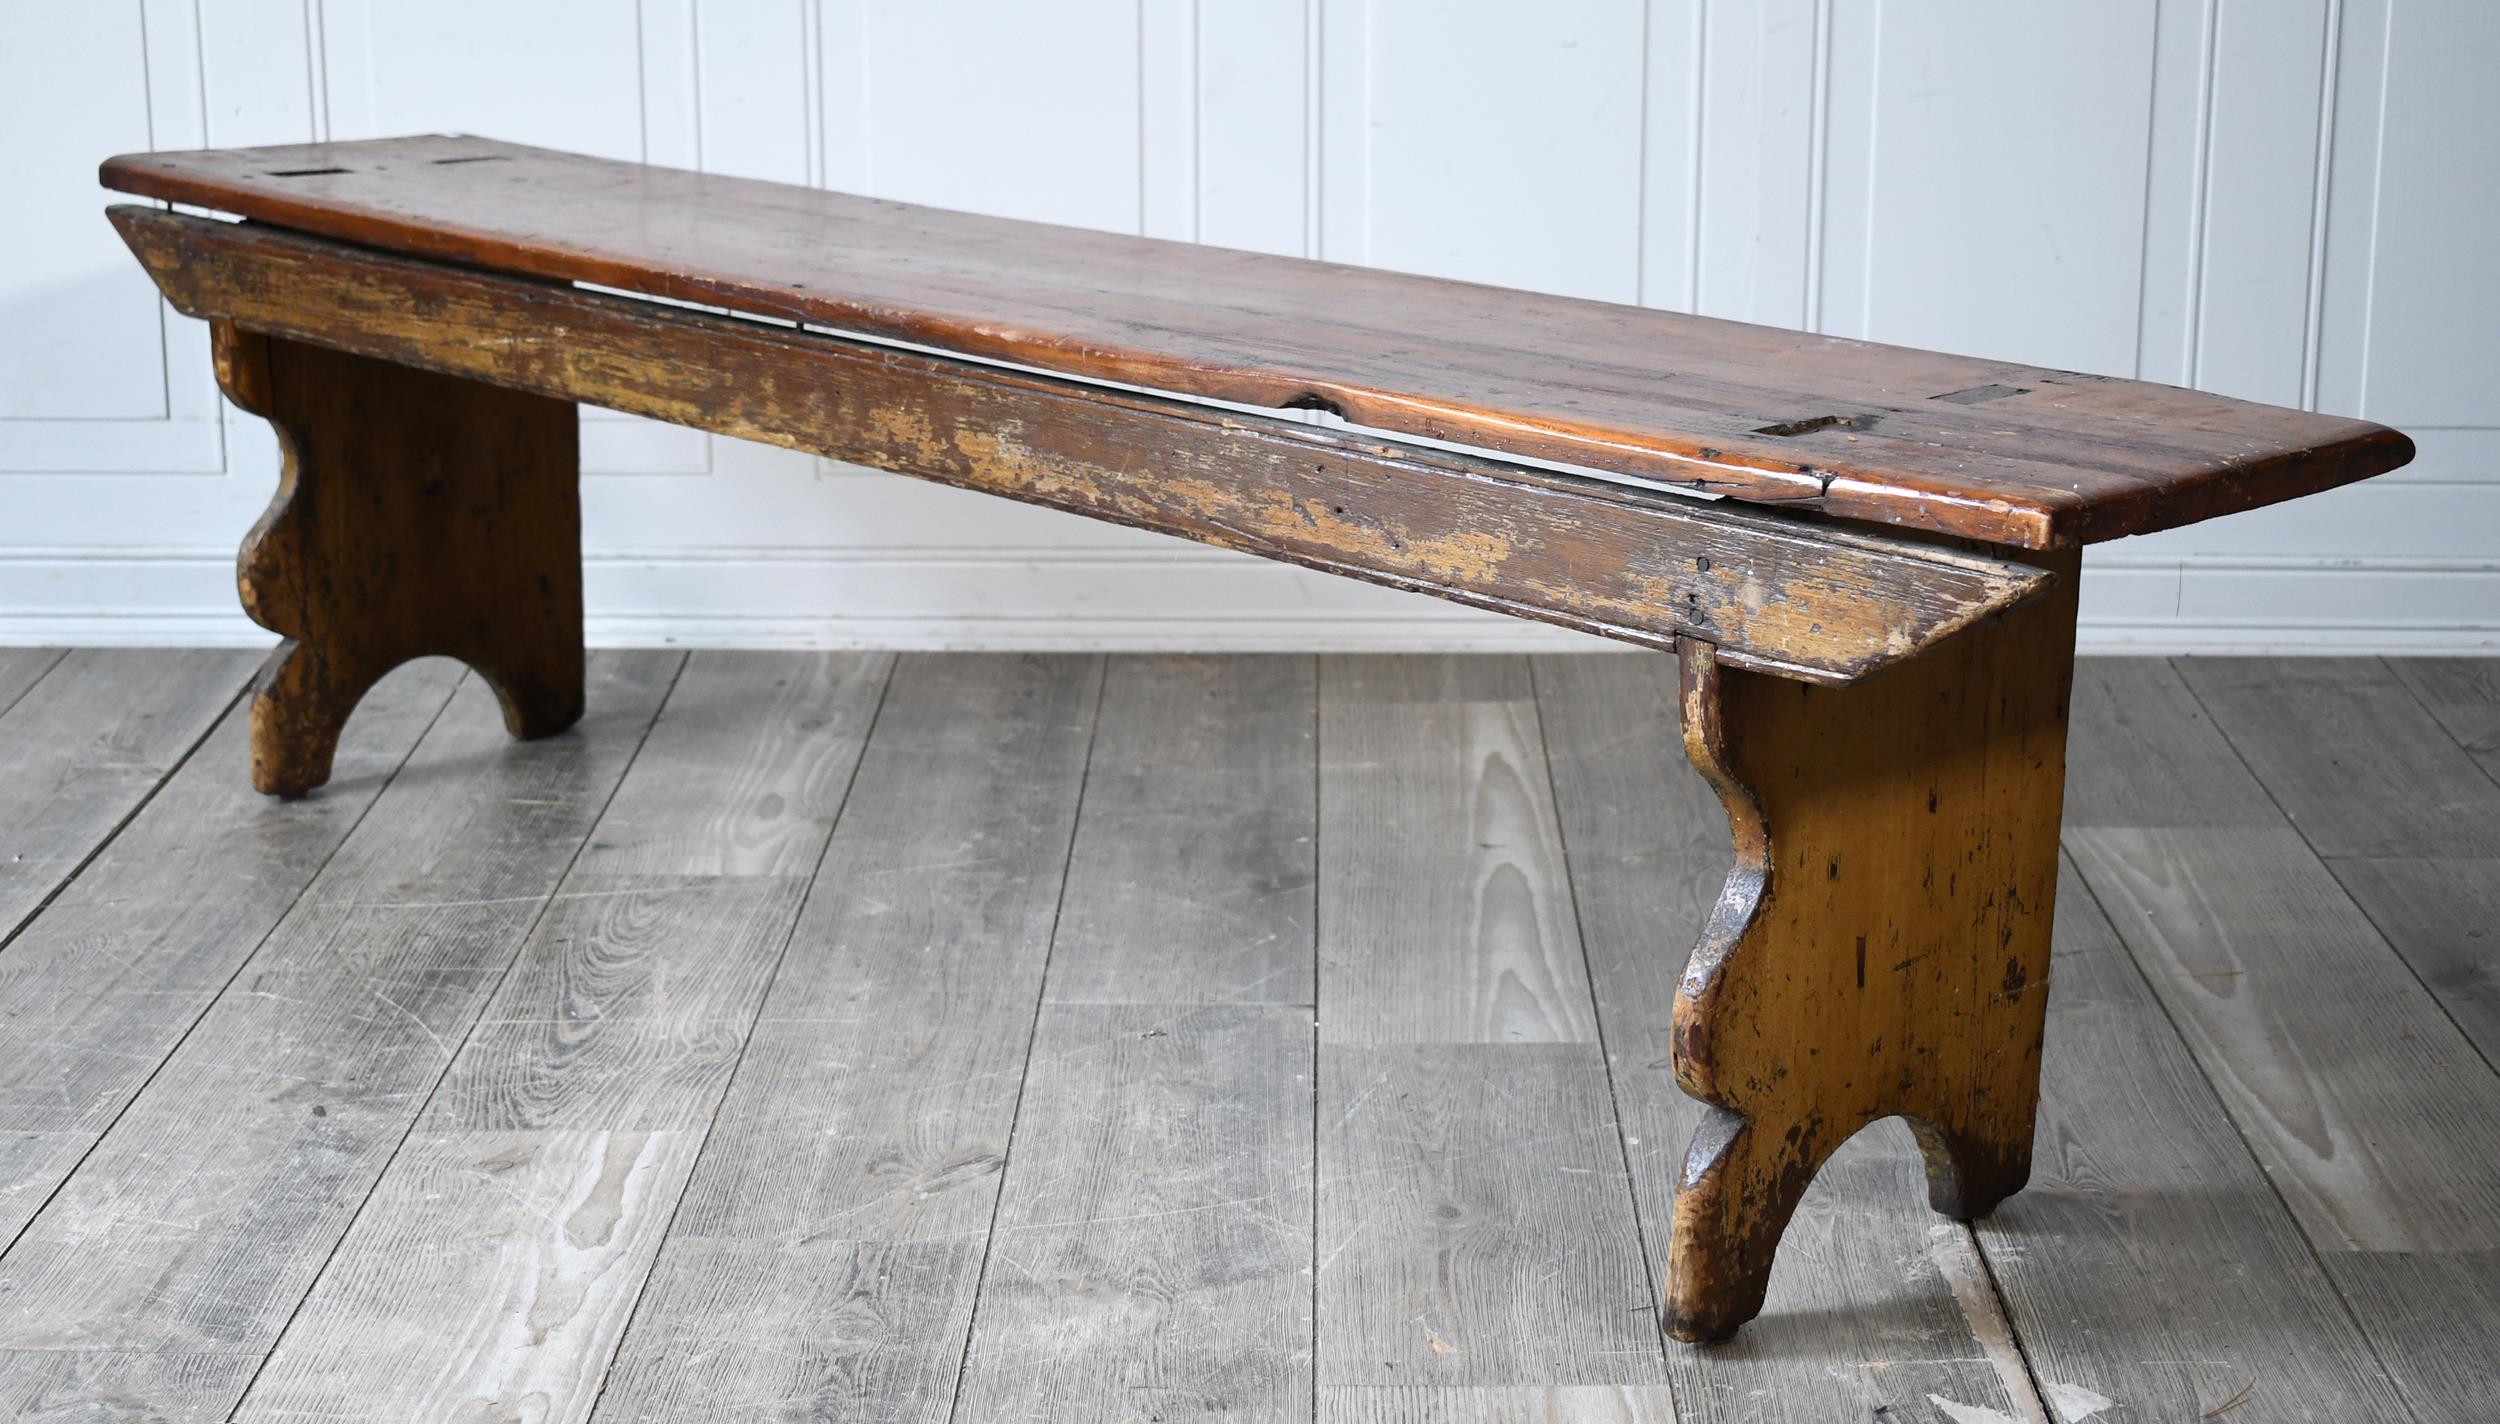 EARLY 19TH C. PA PAINTED BENCH.